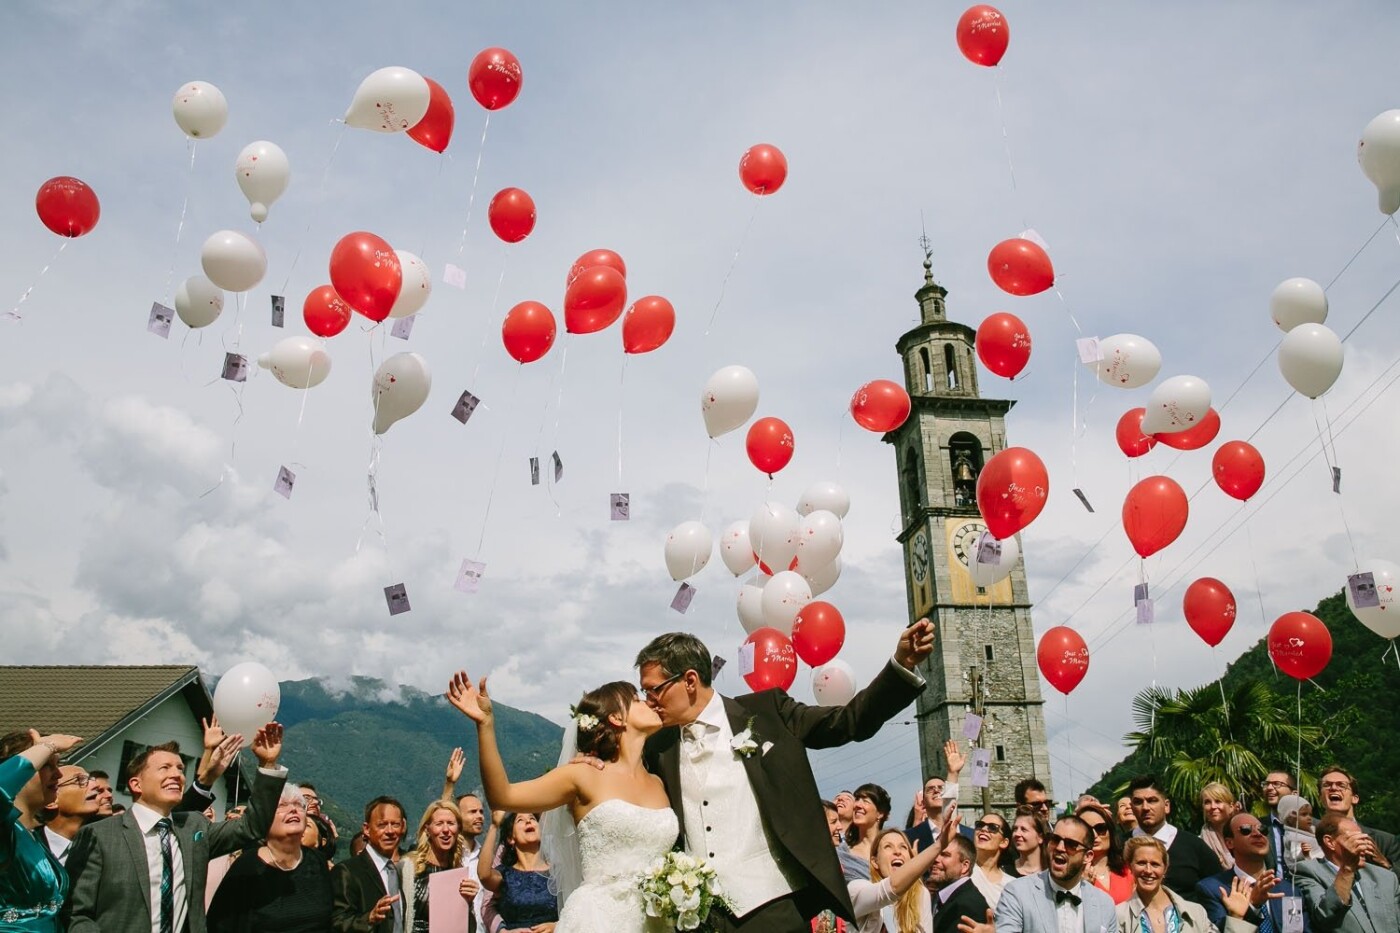 Anina & Sven celebrated their beautiful Swiss wedding in sunny Vallemaggia in Ticino. They asked their guests to write wishes on every balloon so they could send them off to the sky for good luck. Once I saw this moment was happening and that the clouds looked beautiful behind the church tower, I got on my knees to clean the background and filled the sky with the balloons, which certainly added a magical touch when capturing this moment. I loved how their family and friends cheered for them and how romantic and photogenic this rite was.